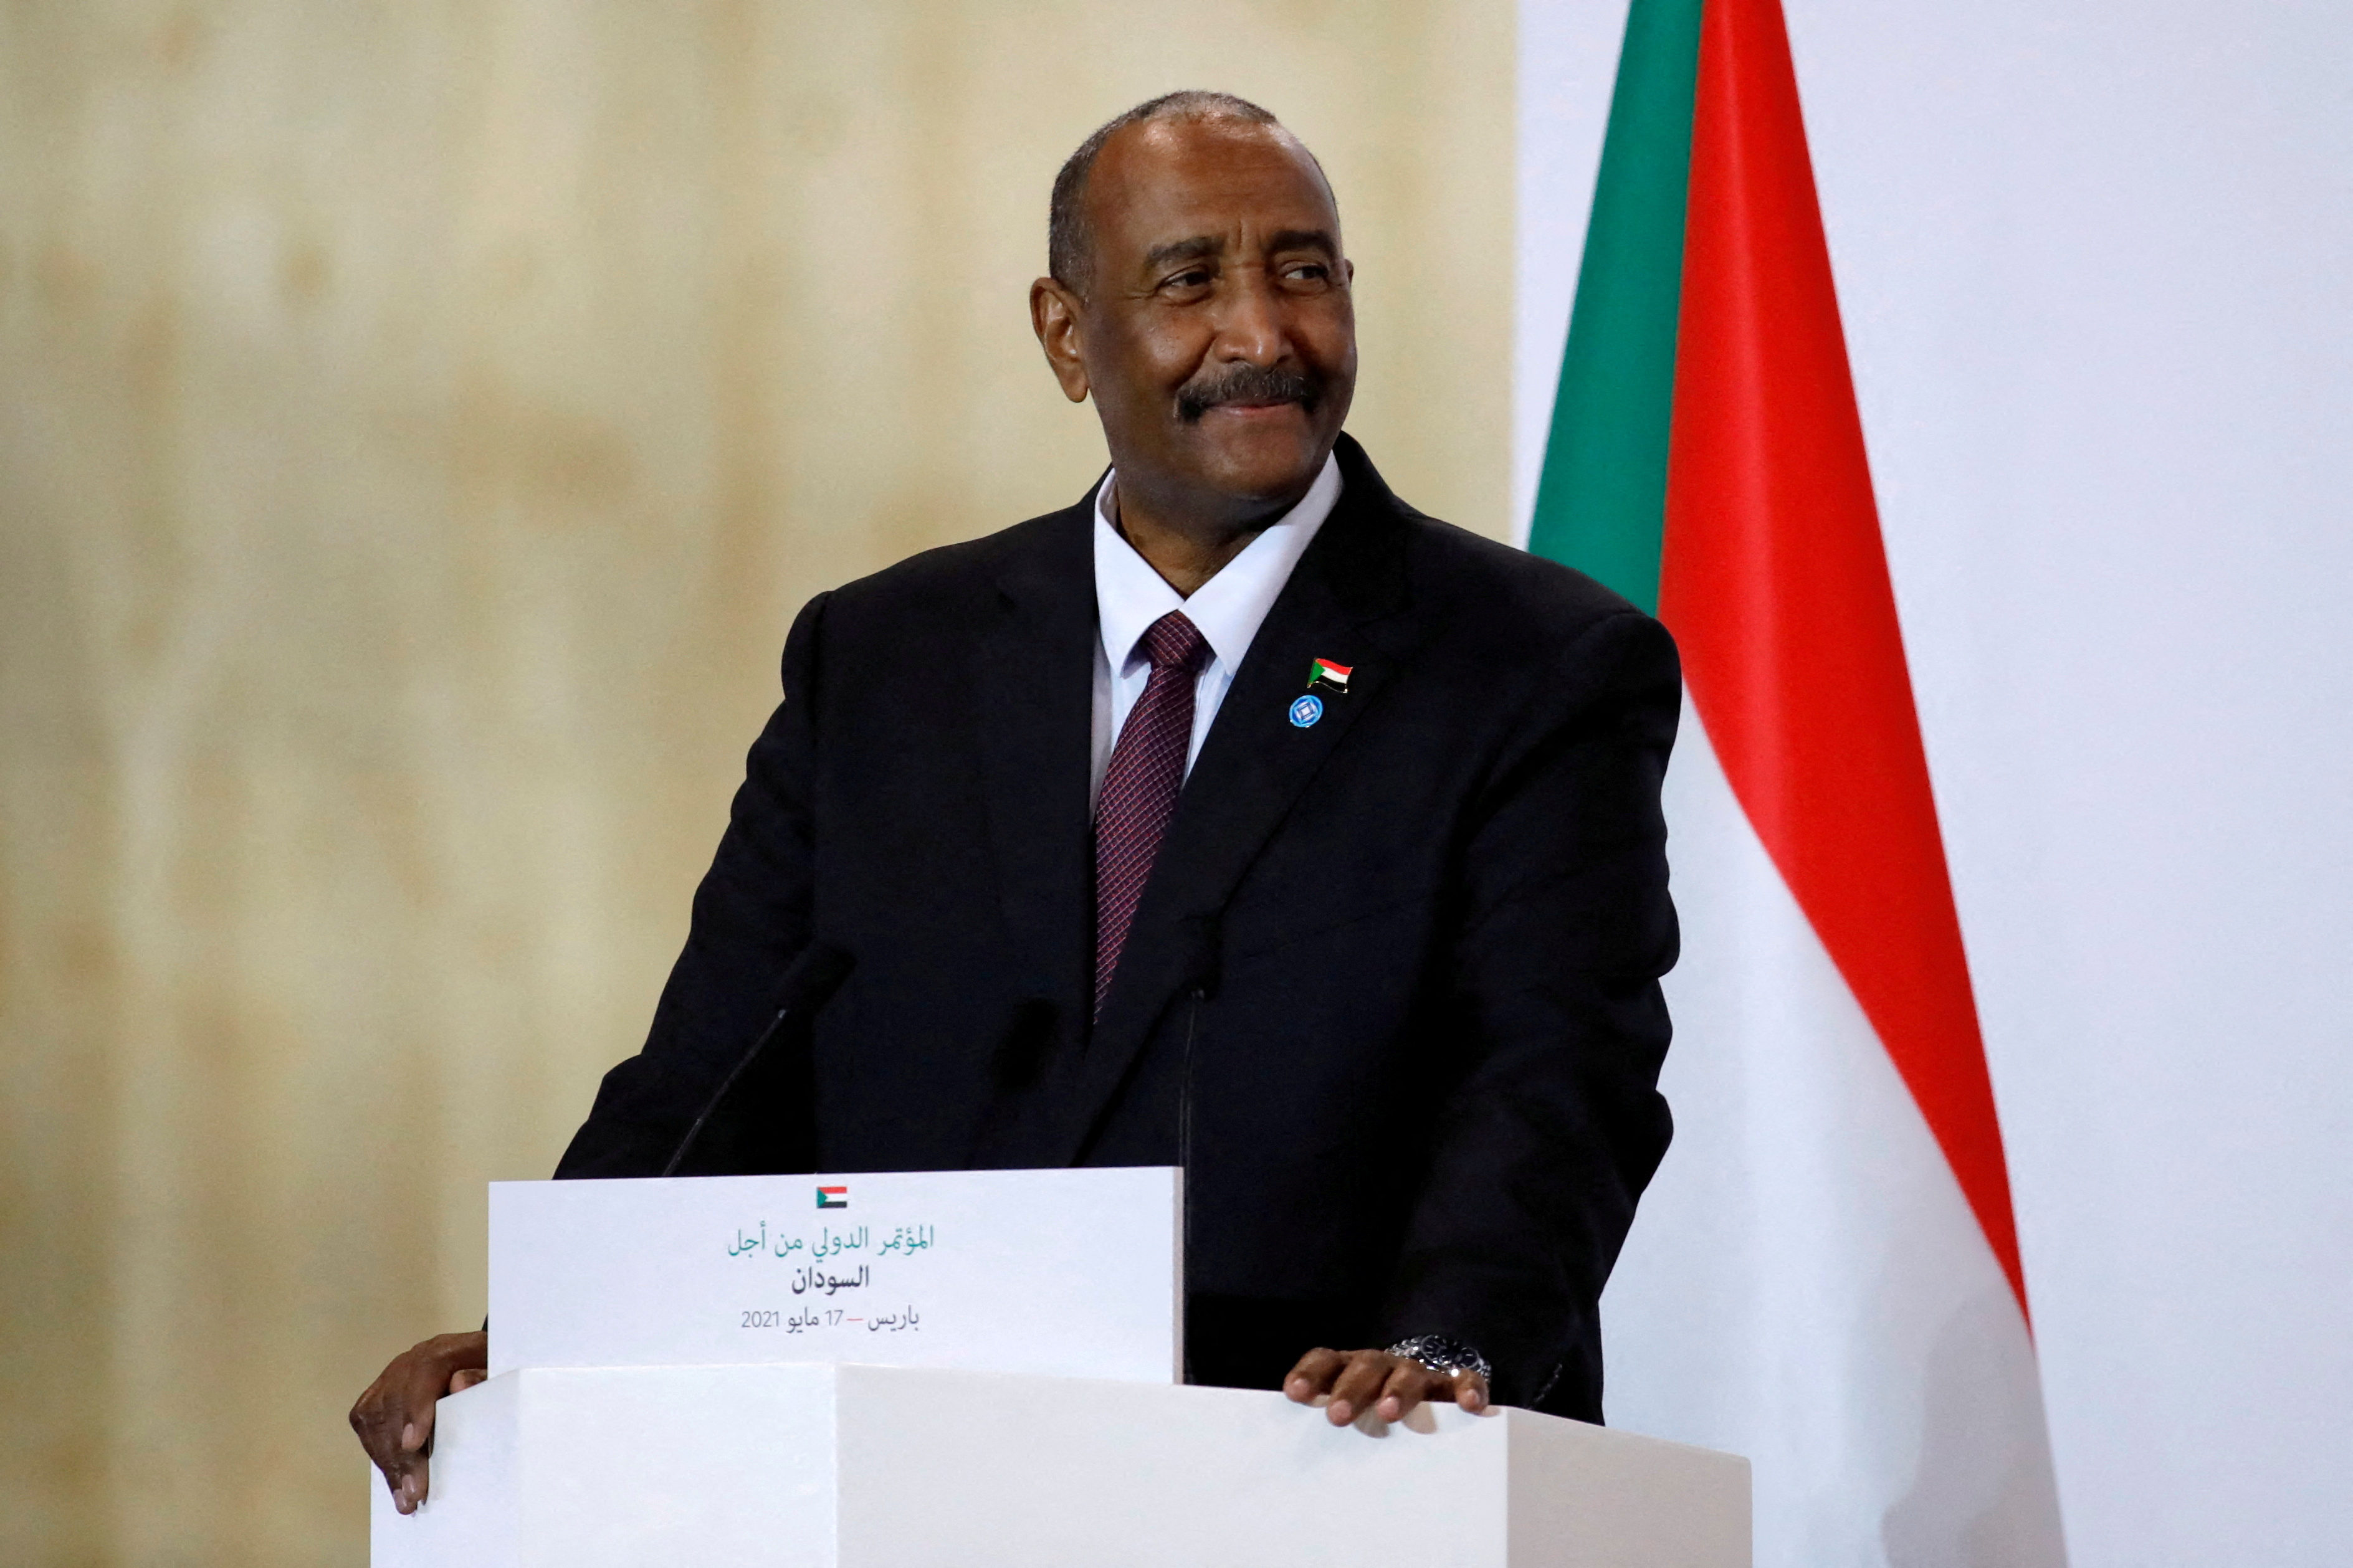 Sudan's Sovereign Council Chief General Abdel Fattah al-Burhan attends a news conference during a visit to Paris, France